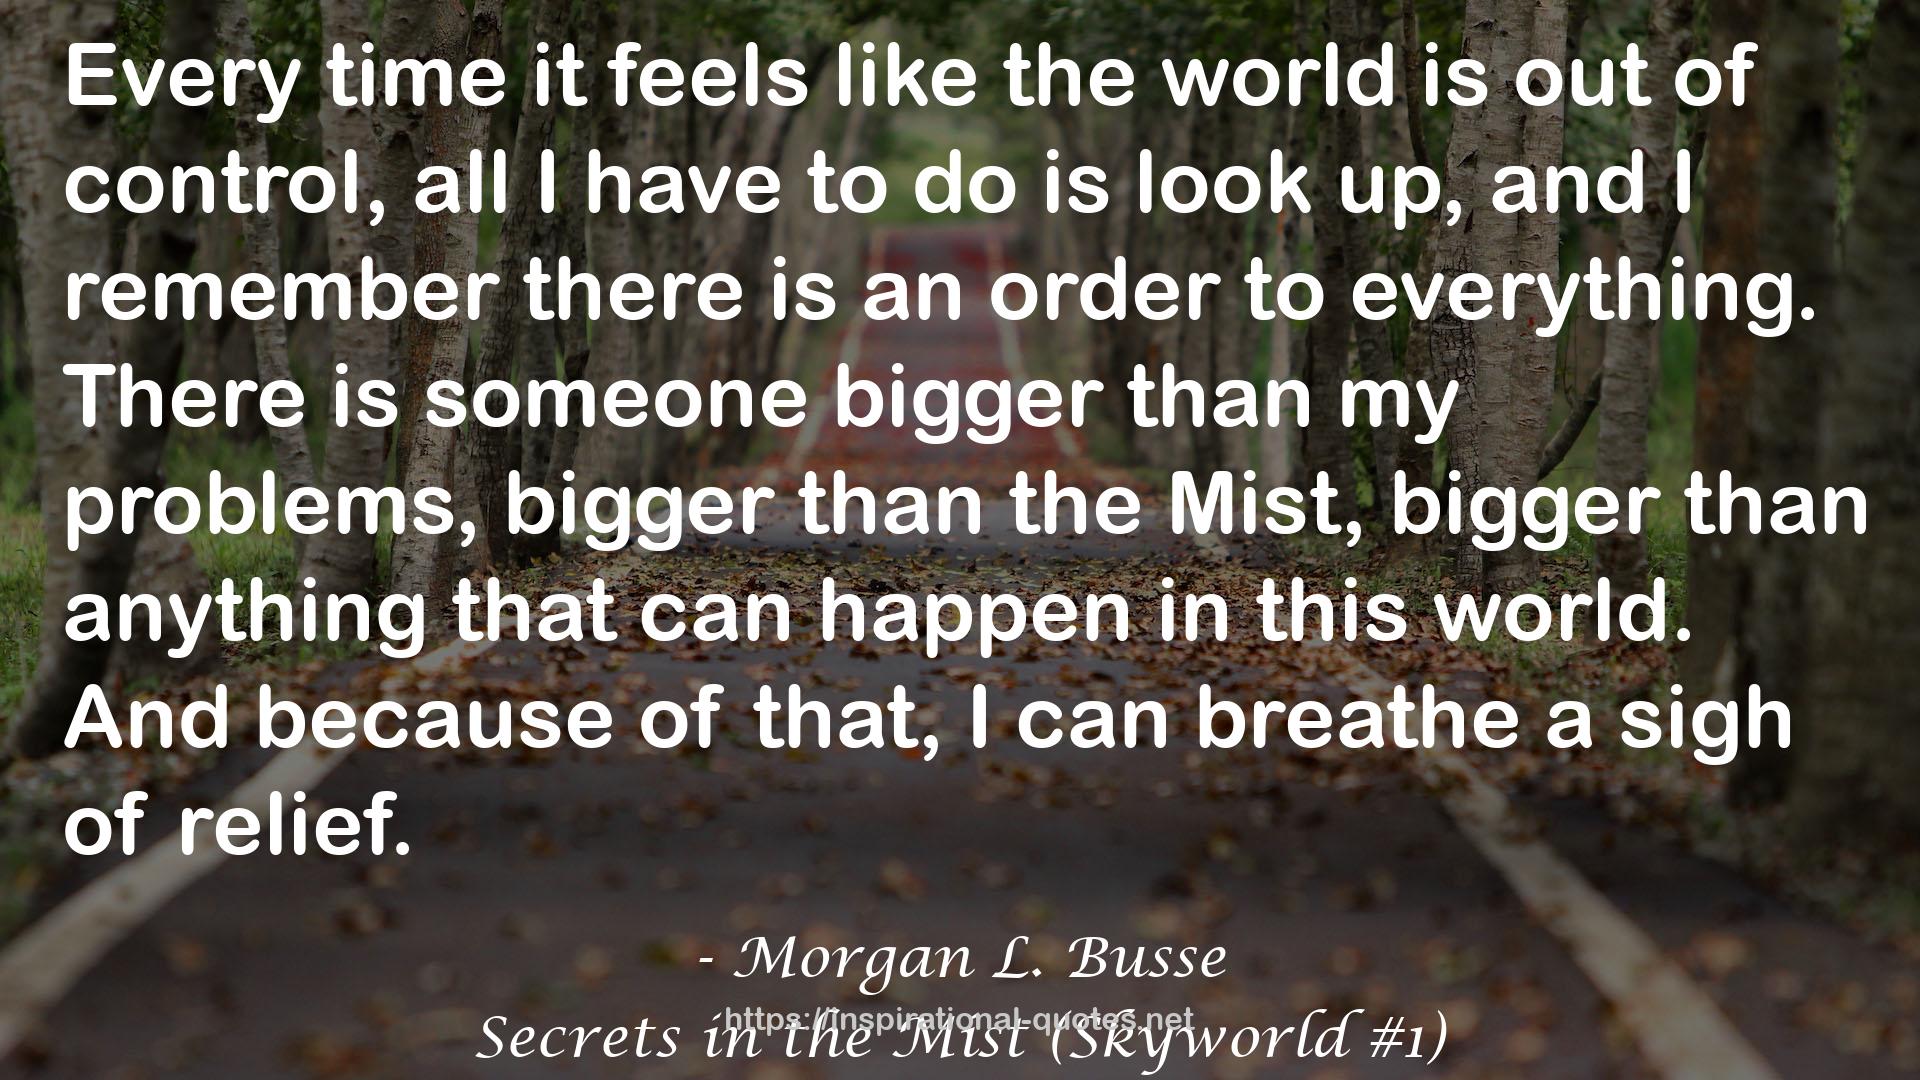 Secrets in the Mist (Skyworld #1) QUOTES